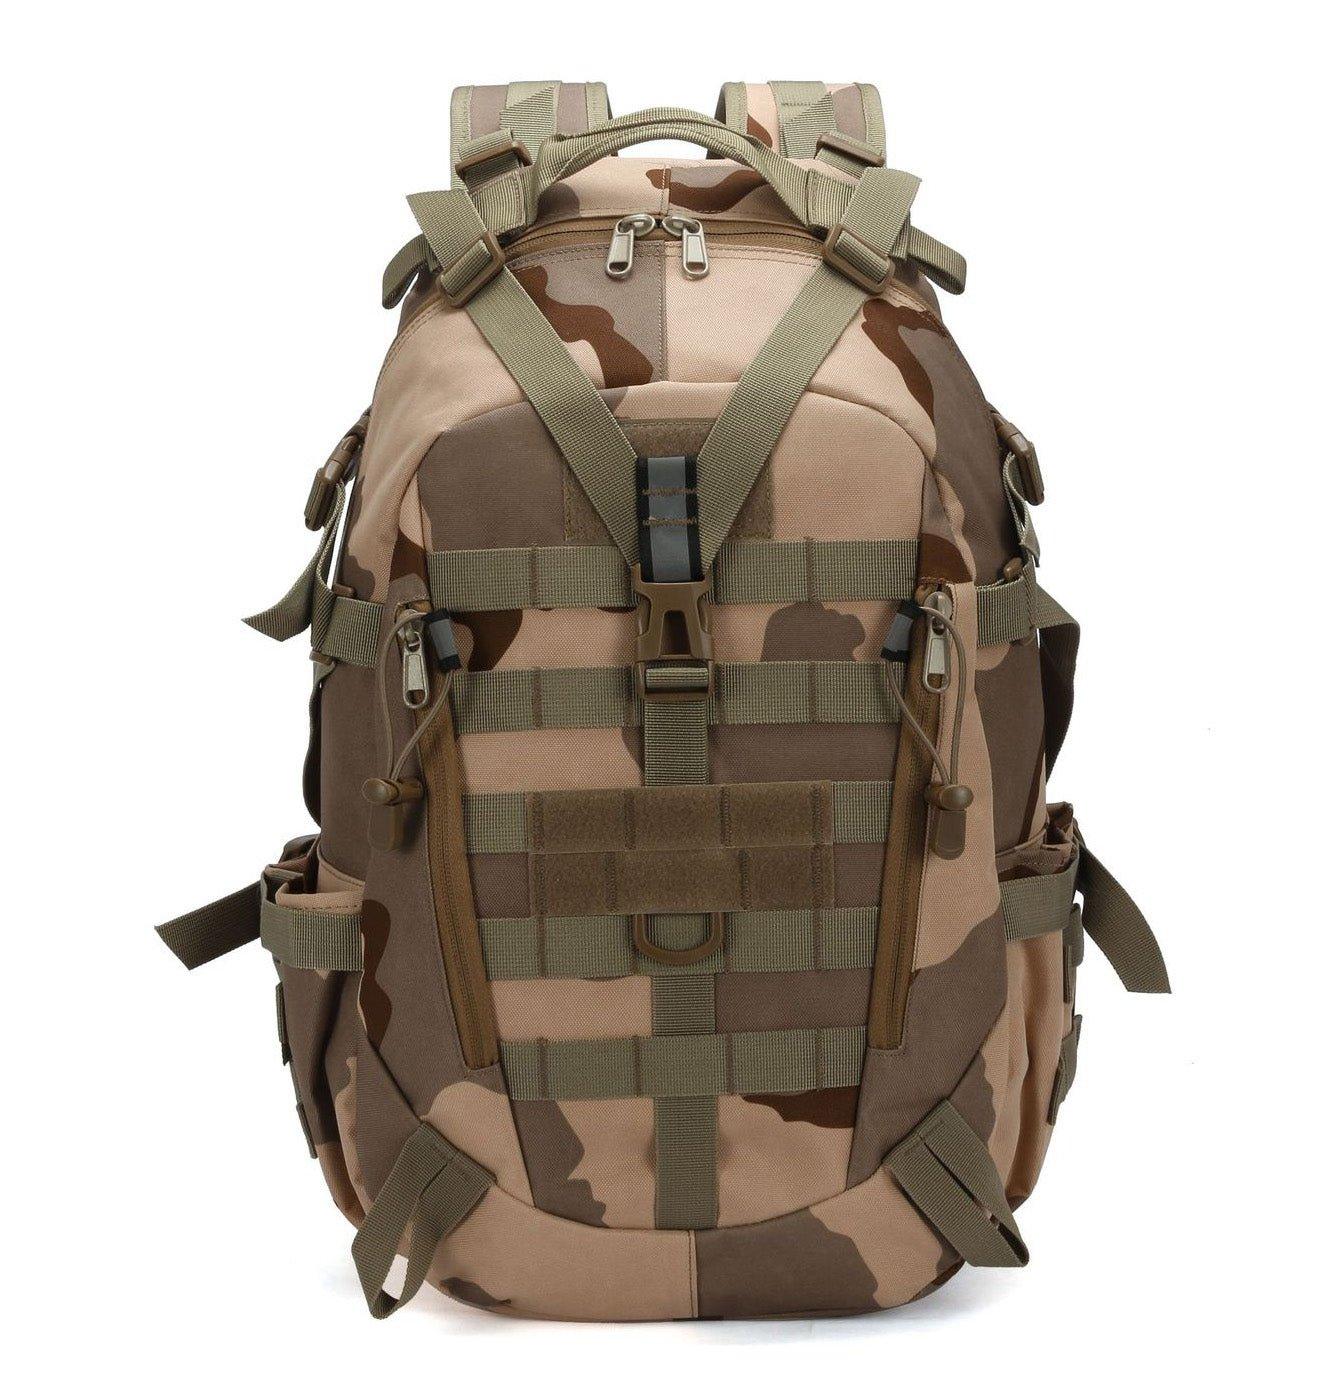 35L Molle Backpacks With Reflector Straps - Woosir